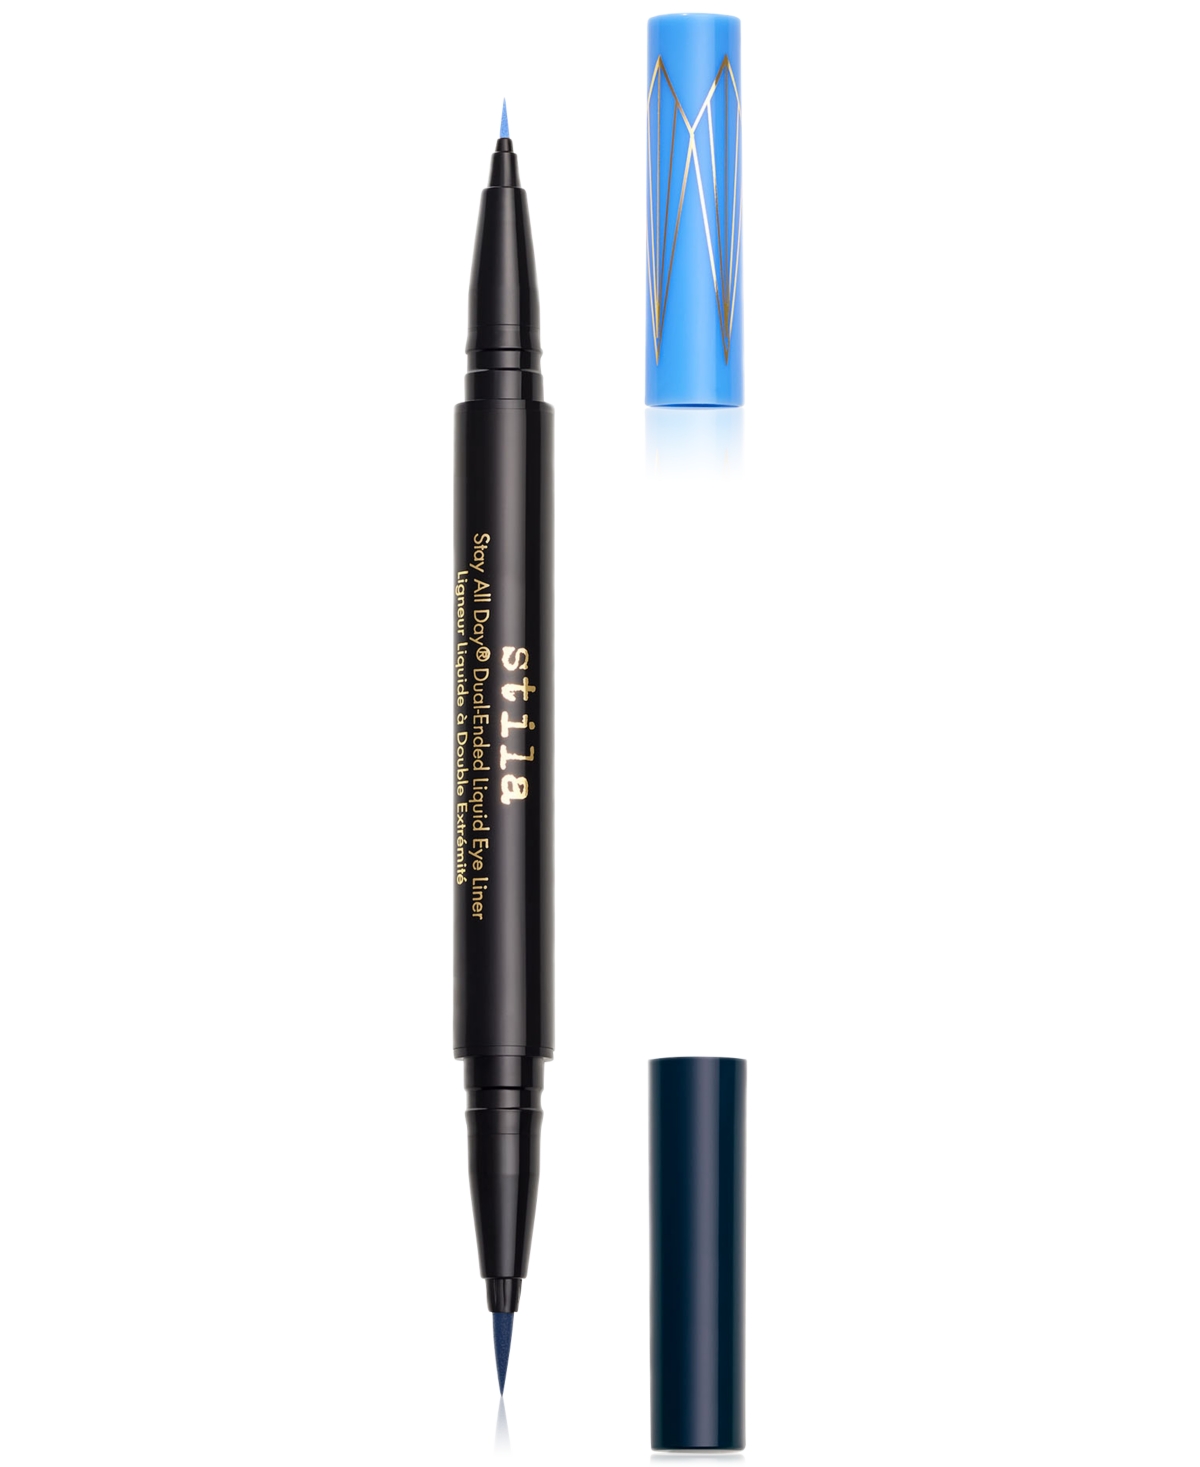 Stila Stay All Day Dual-ended Liquid Eye Liner In Periwnkle,midnight [wn]